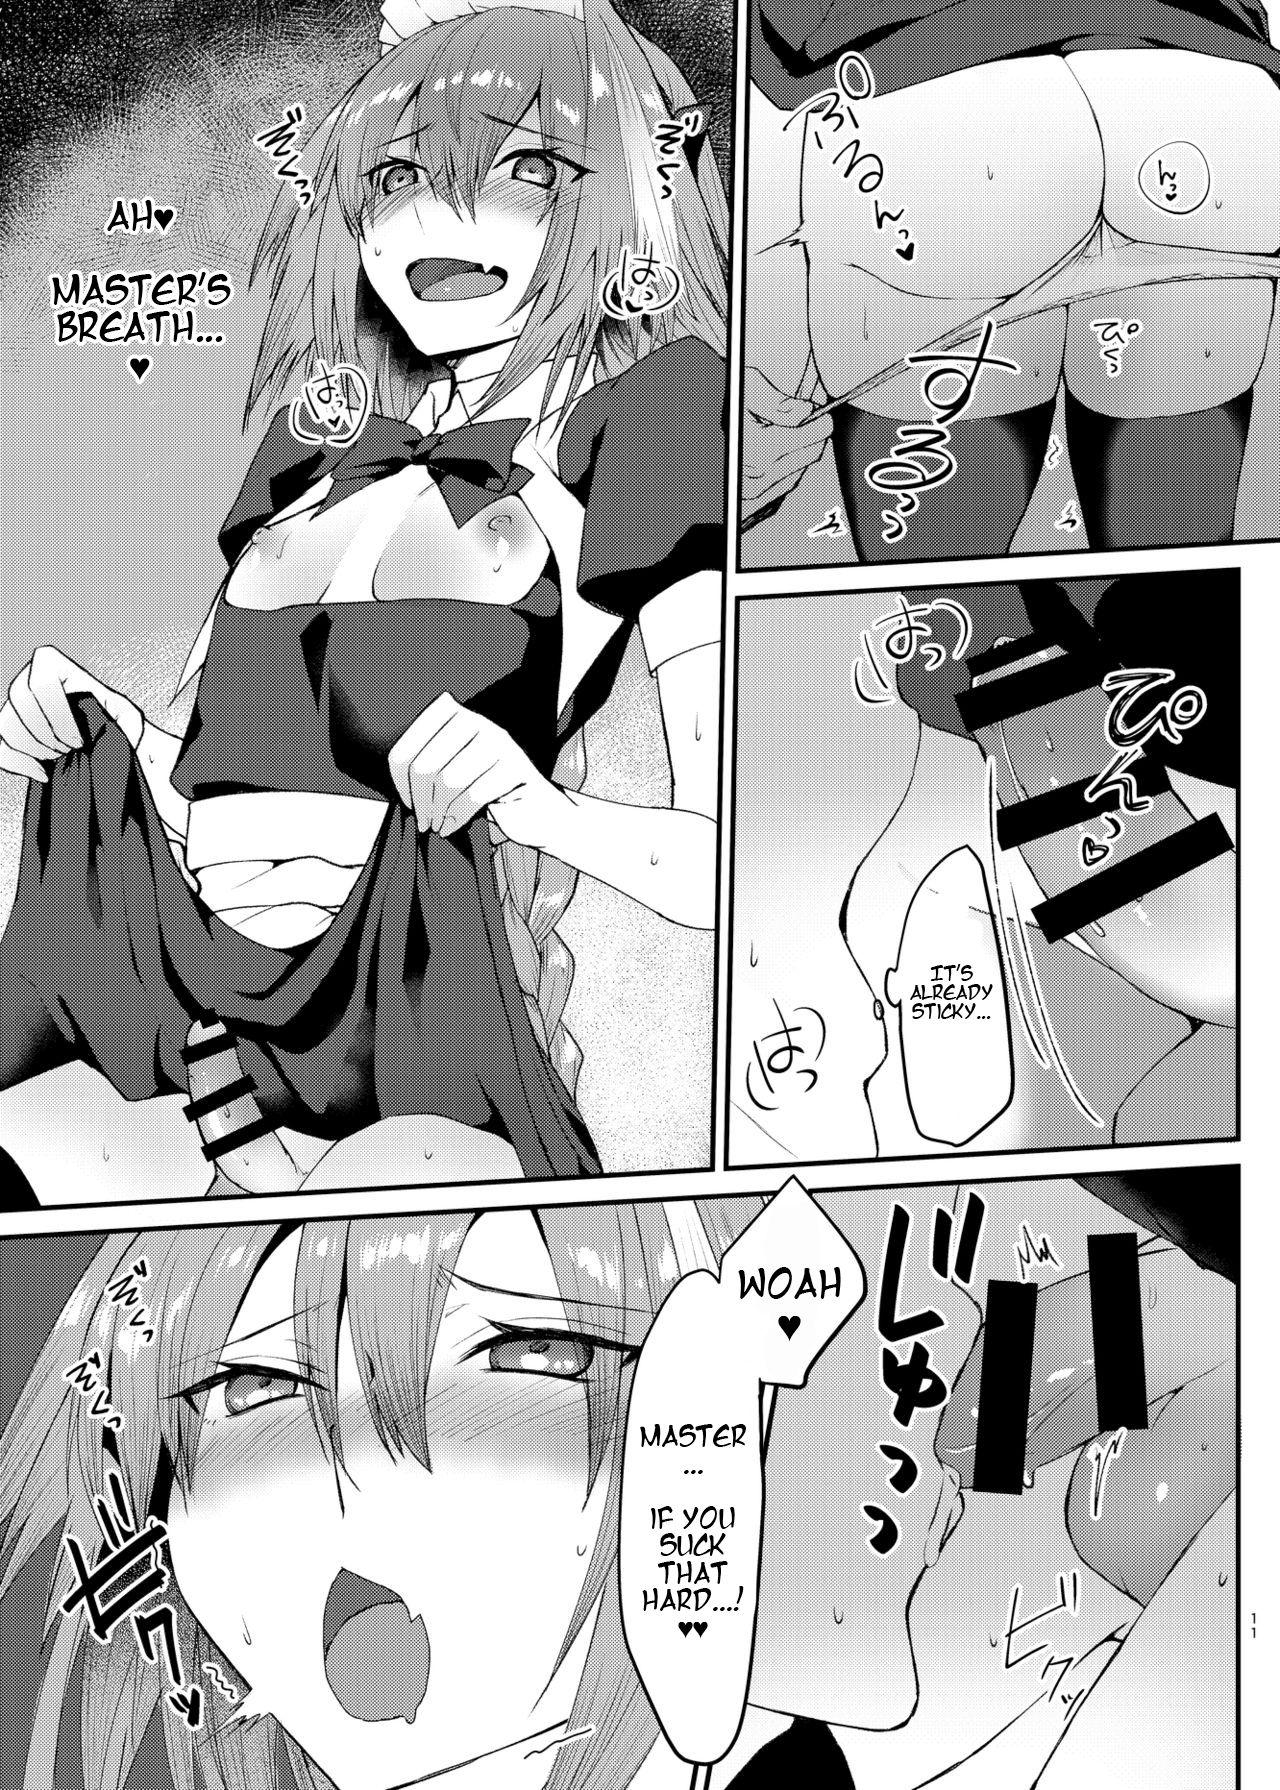 Slut Astolfo-kun to Cosplay H suru Hon | Cosplay H with Astolfo - Fate grand order Shemale Sex - Page 11